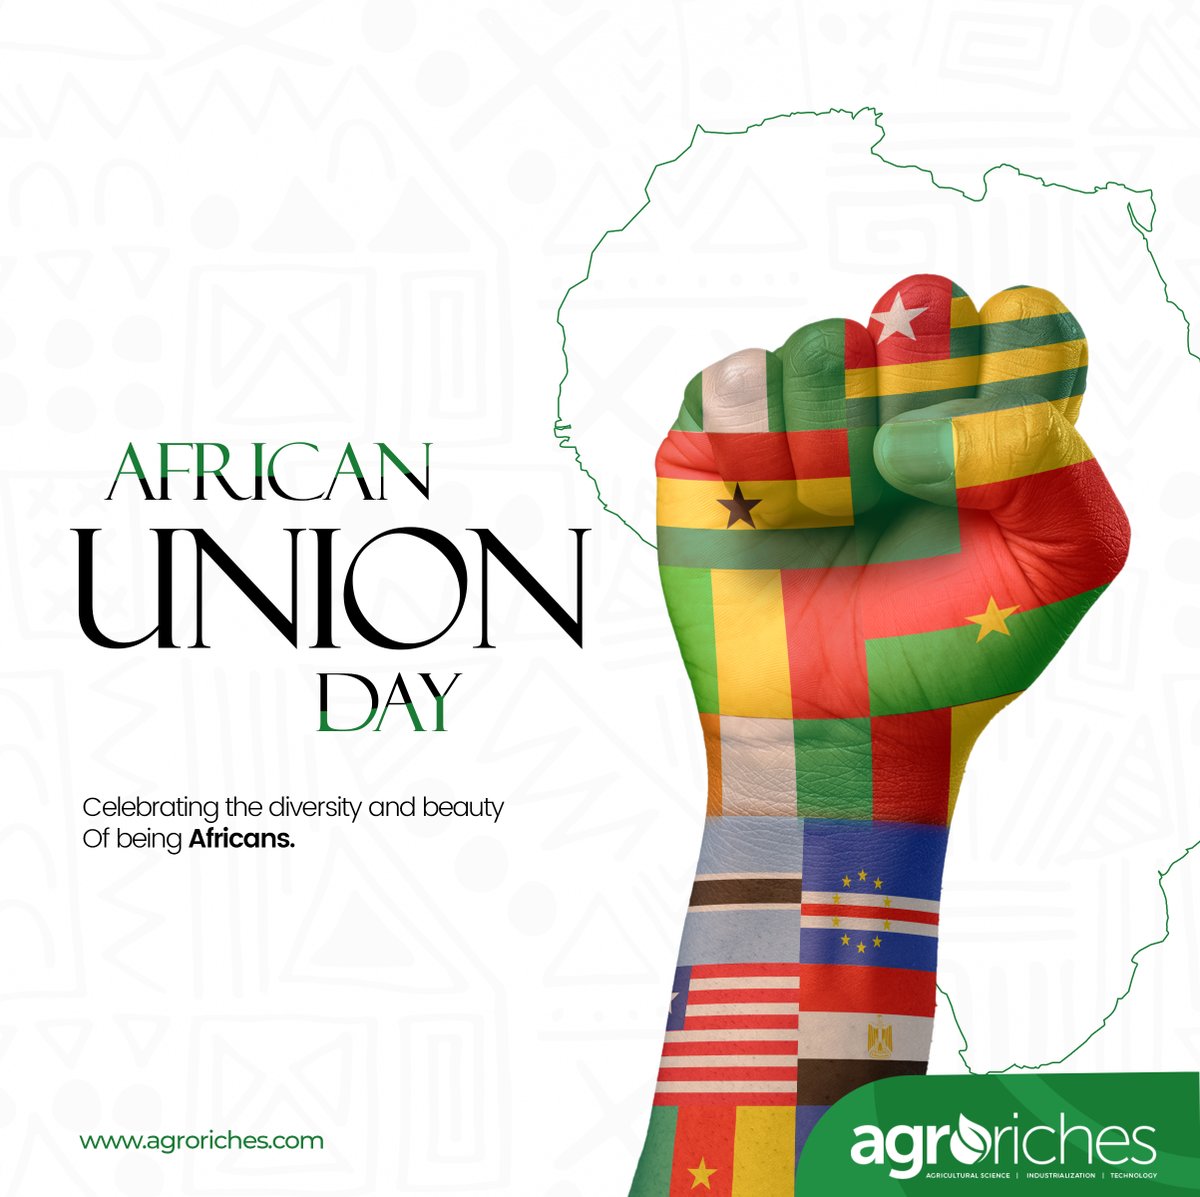 African Union Day!

The Africa Union, igniting hope, driving transformation. Joining hands for a prosperous continent.

#transformation #africa #africa #union #AfricaUnionDay #UnityInAfrica #AfricanUnitY #ProgressInAfrica #AfricanPride #PanAfricanism #SolidarityInAfrica